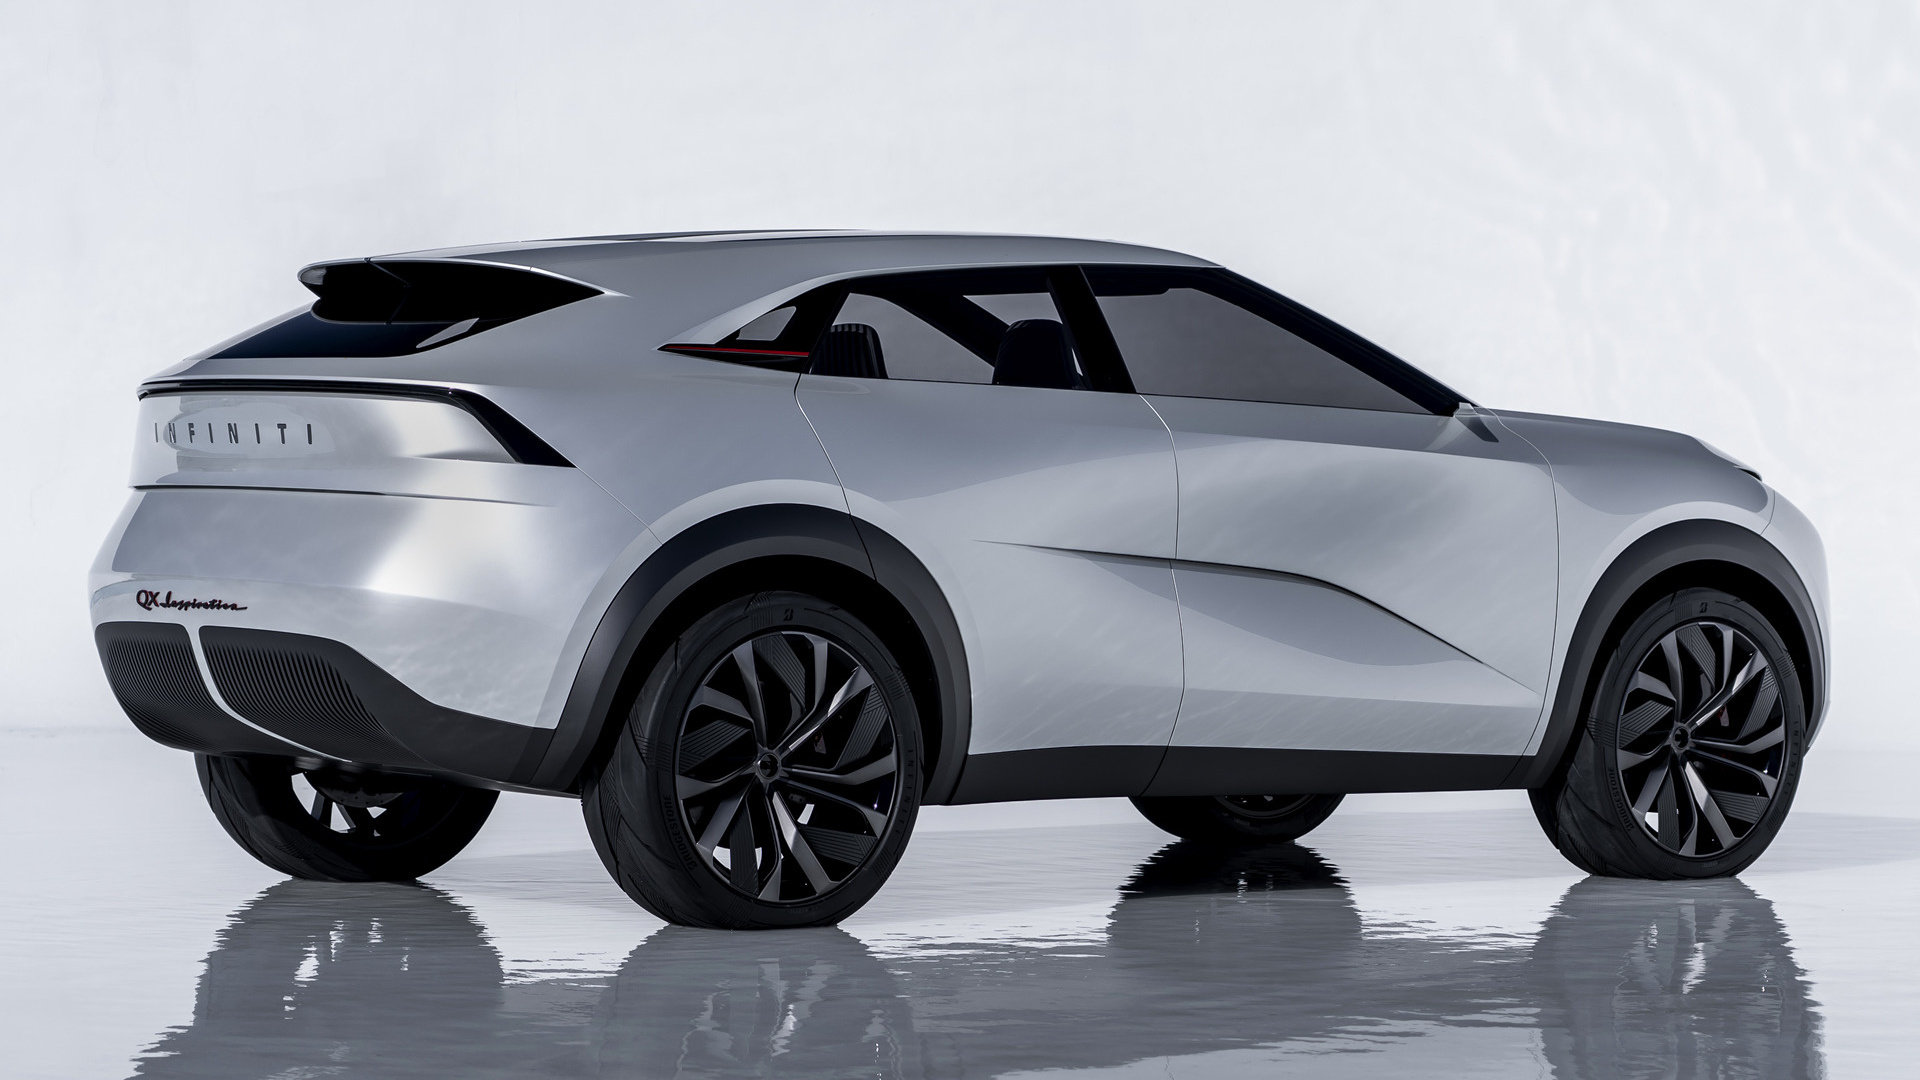 2019 Infiniti QX Inspiration Concept - Wallpapers and HD Images | Car Pixel